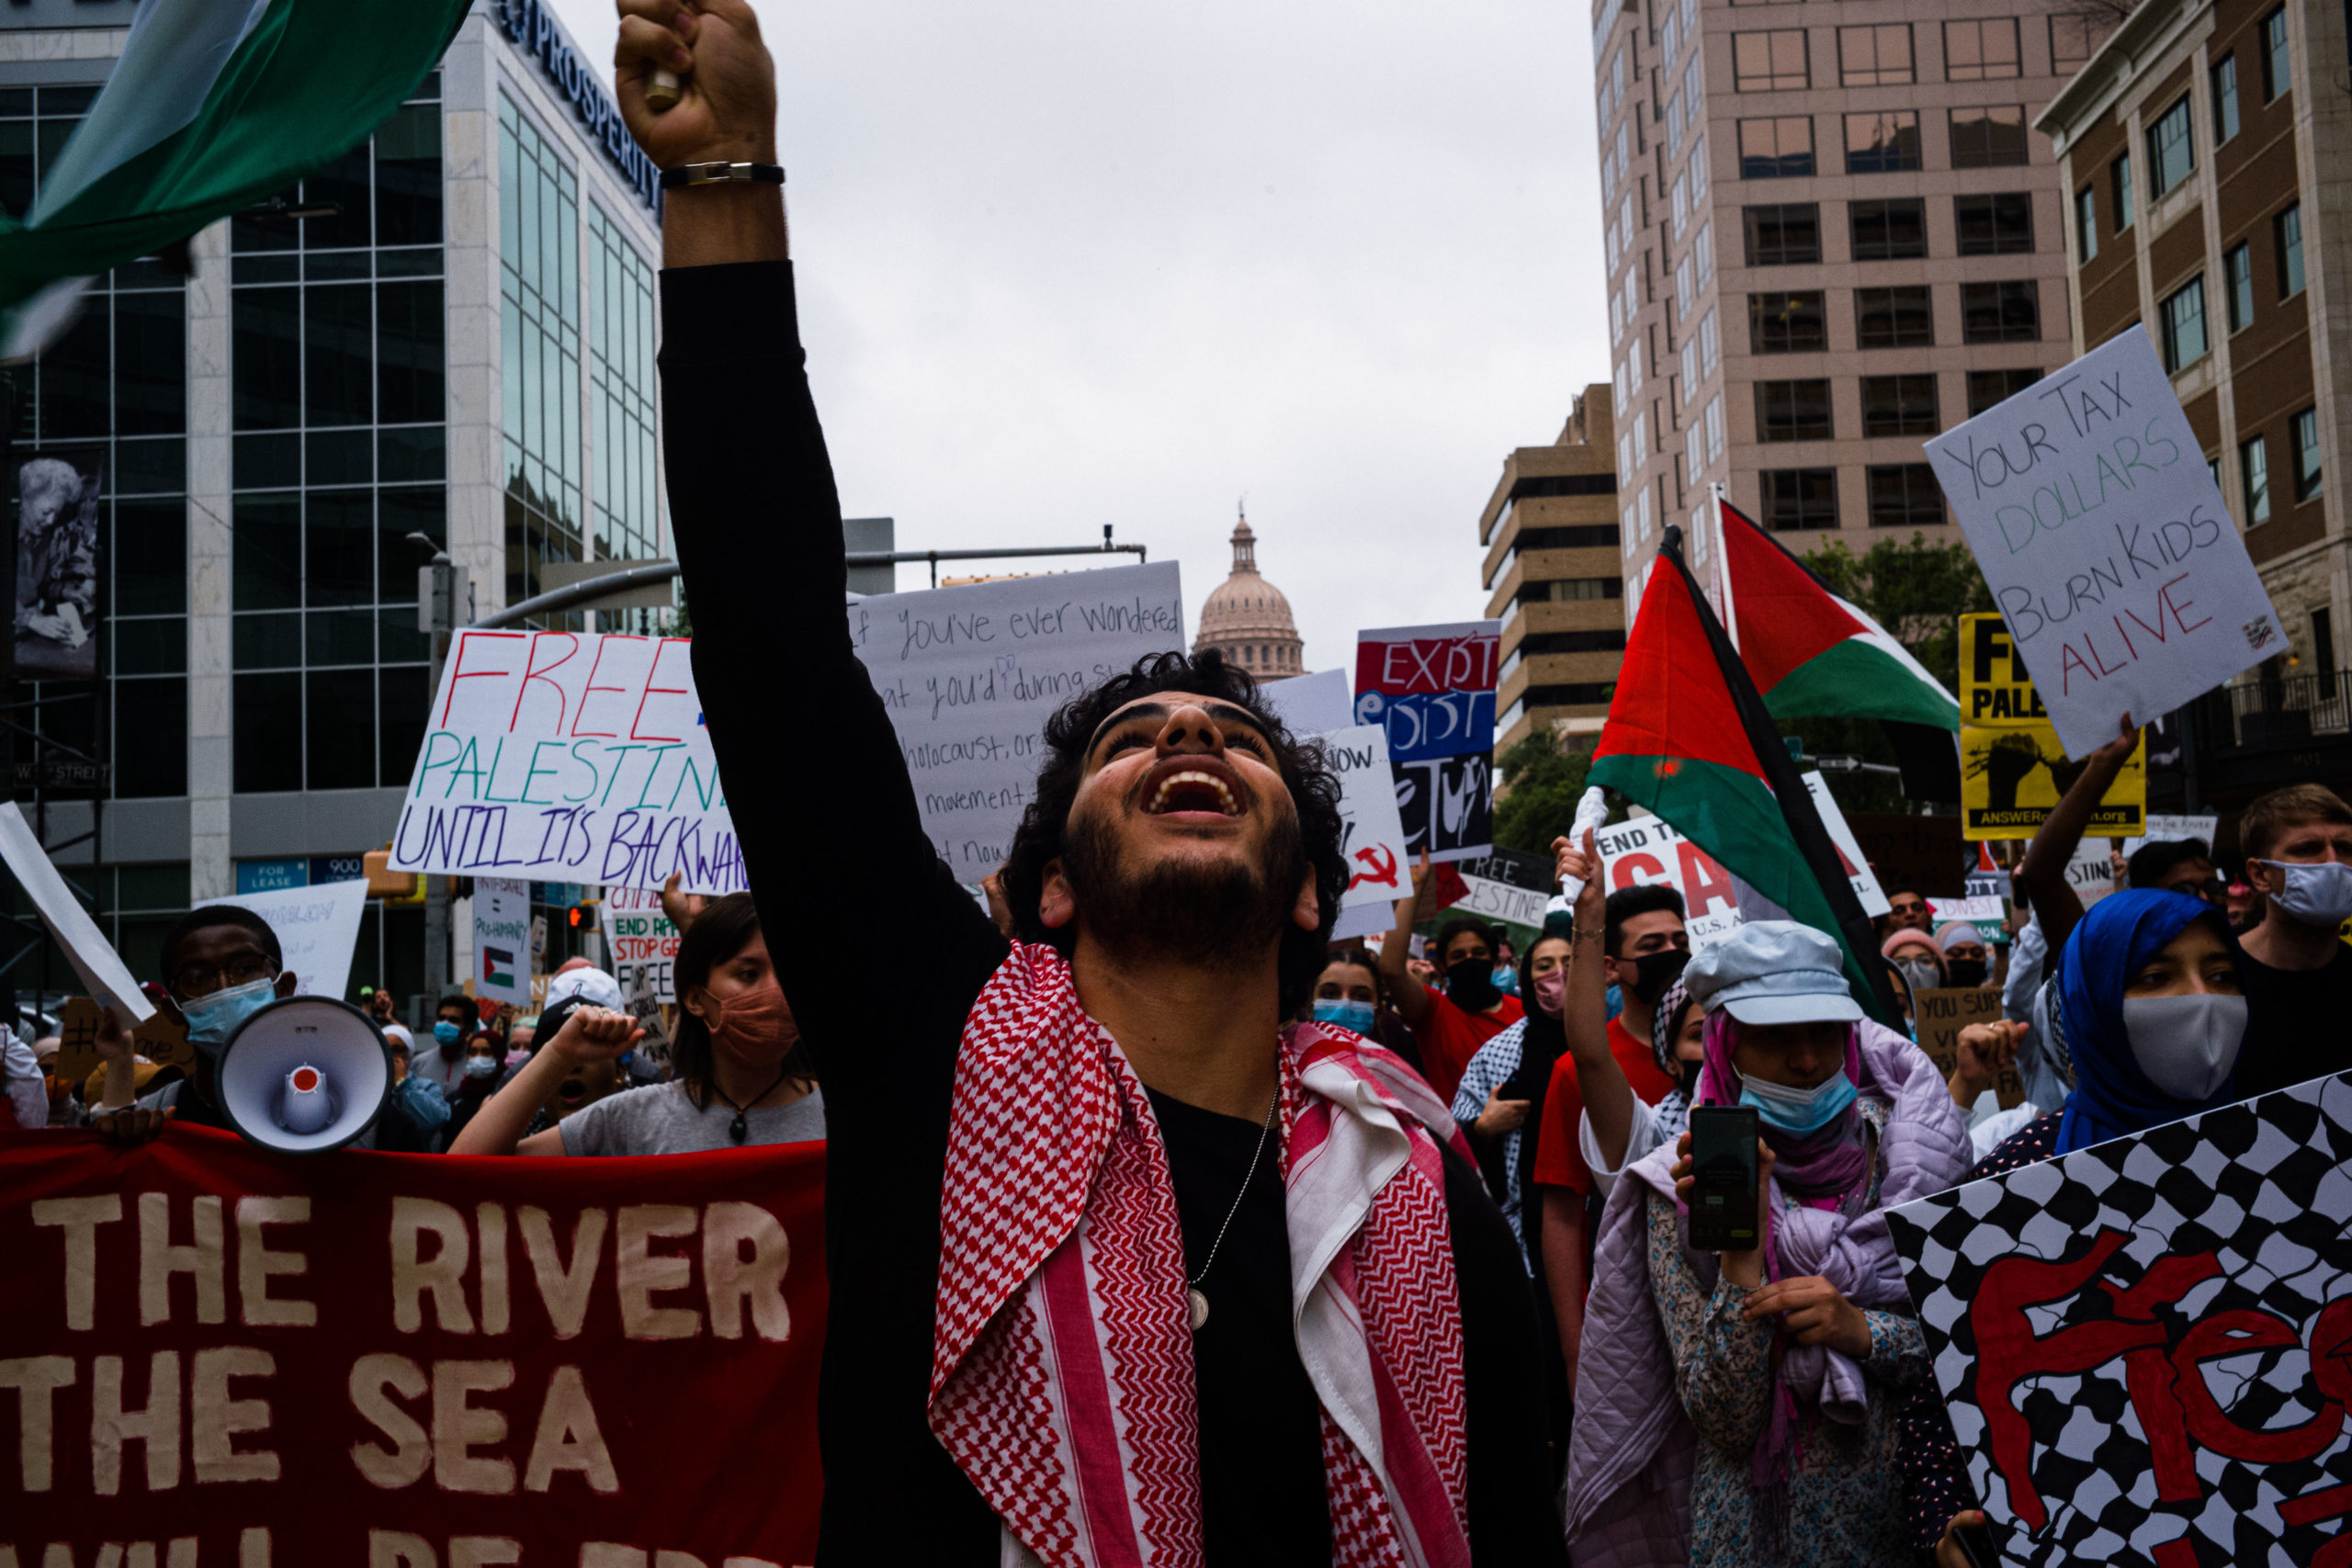 Pro-Palestine demonstrators march down Congress Ave with the Texas Capitol in the background